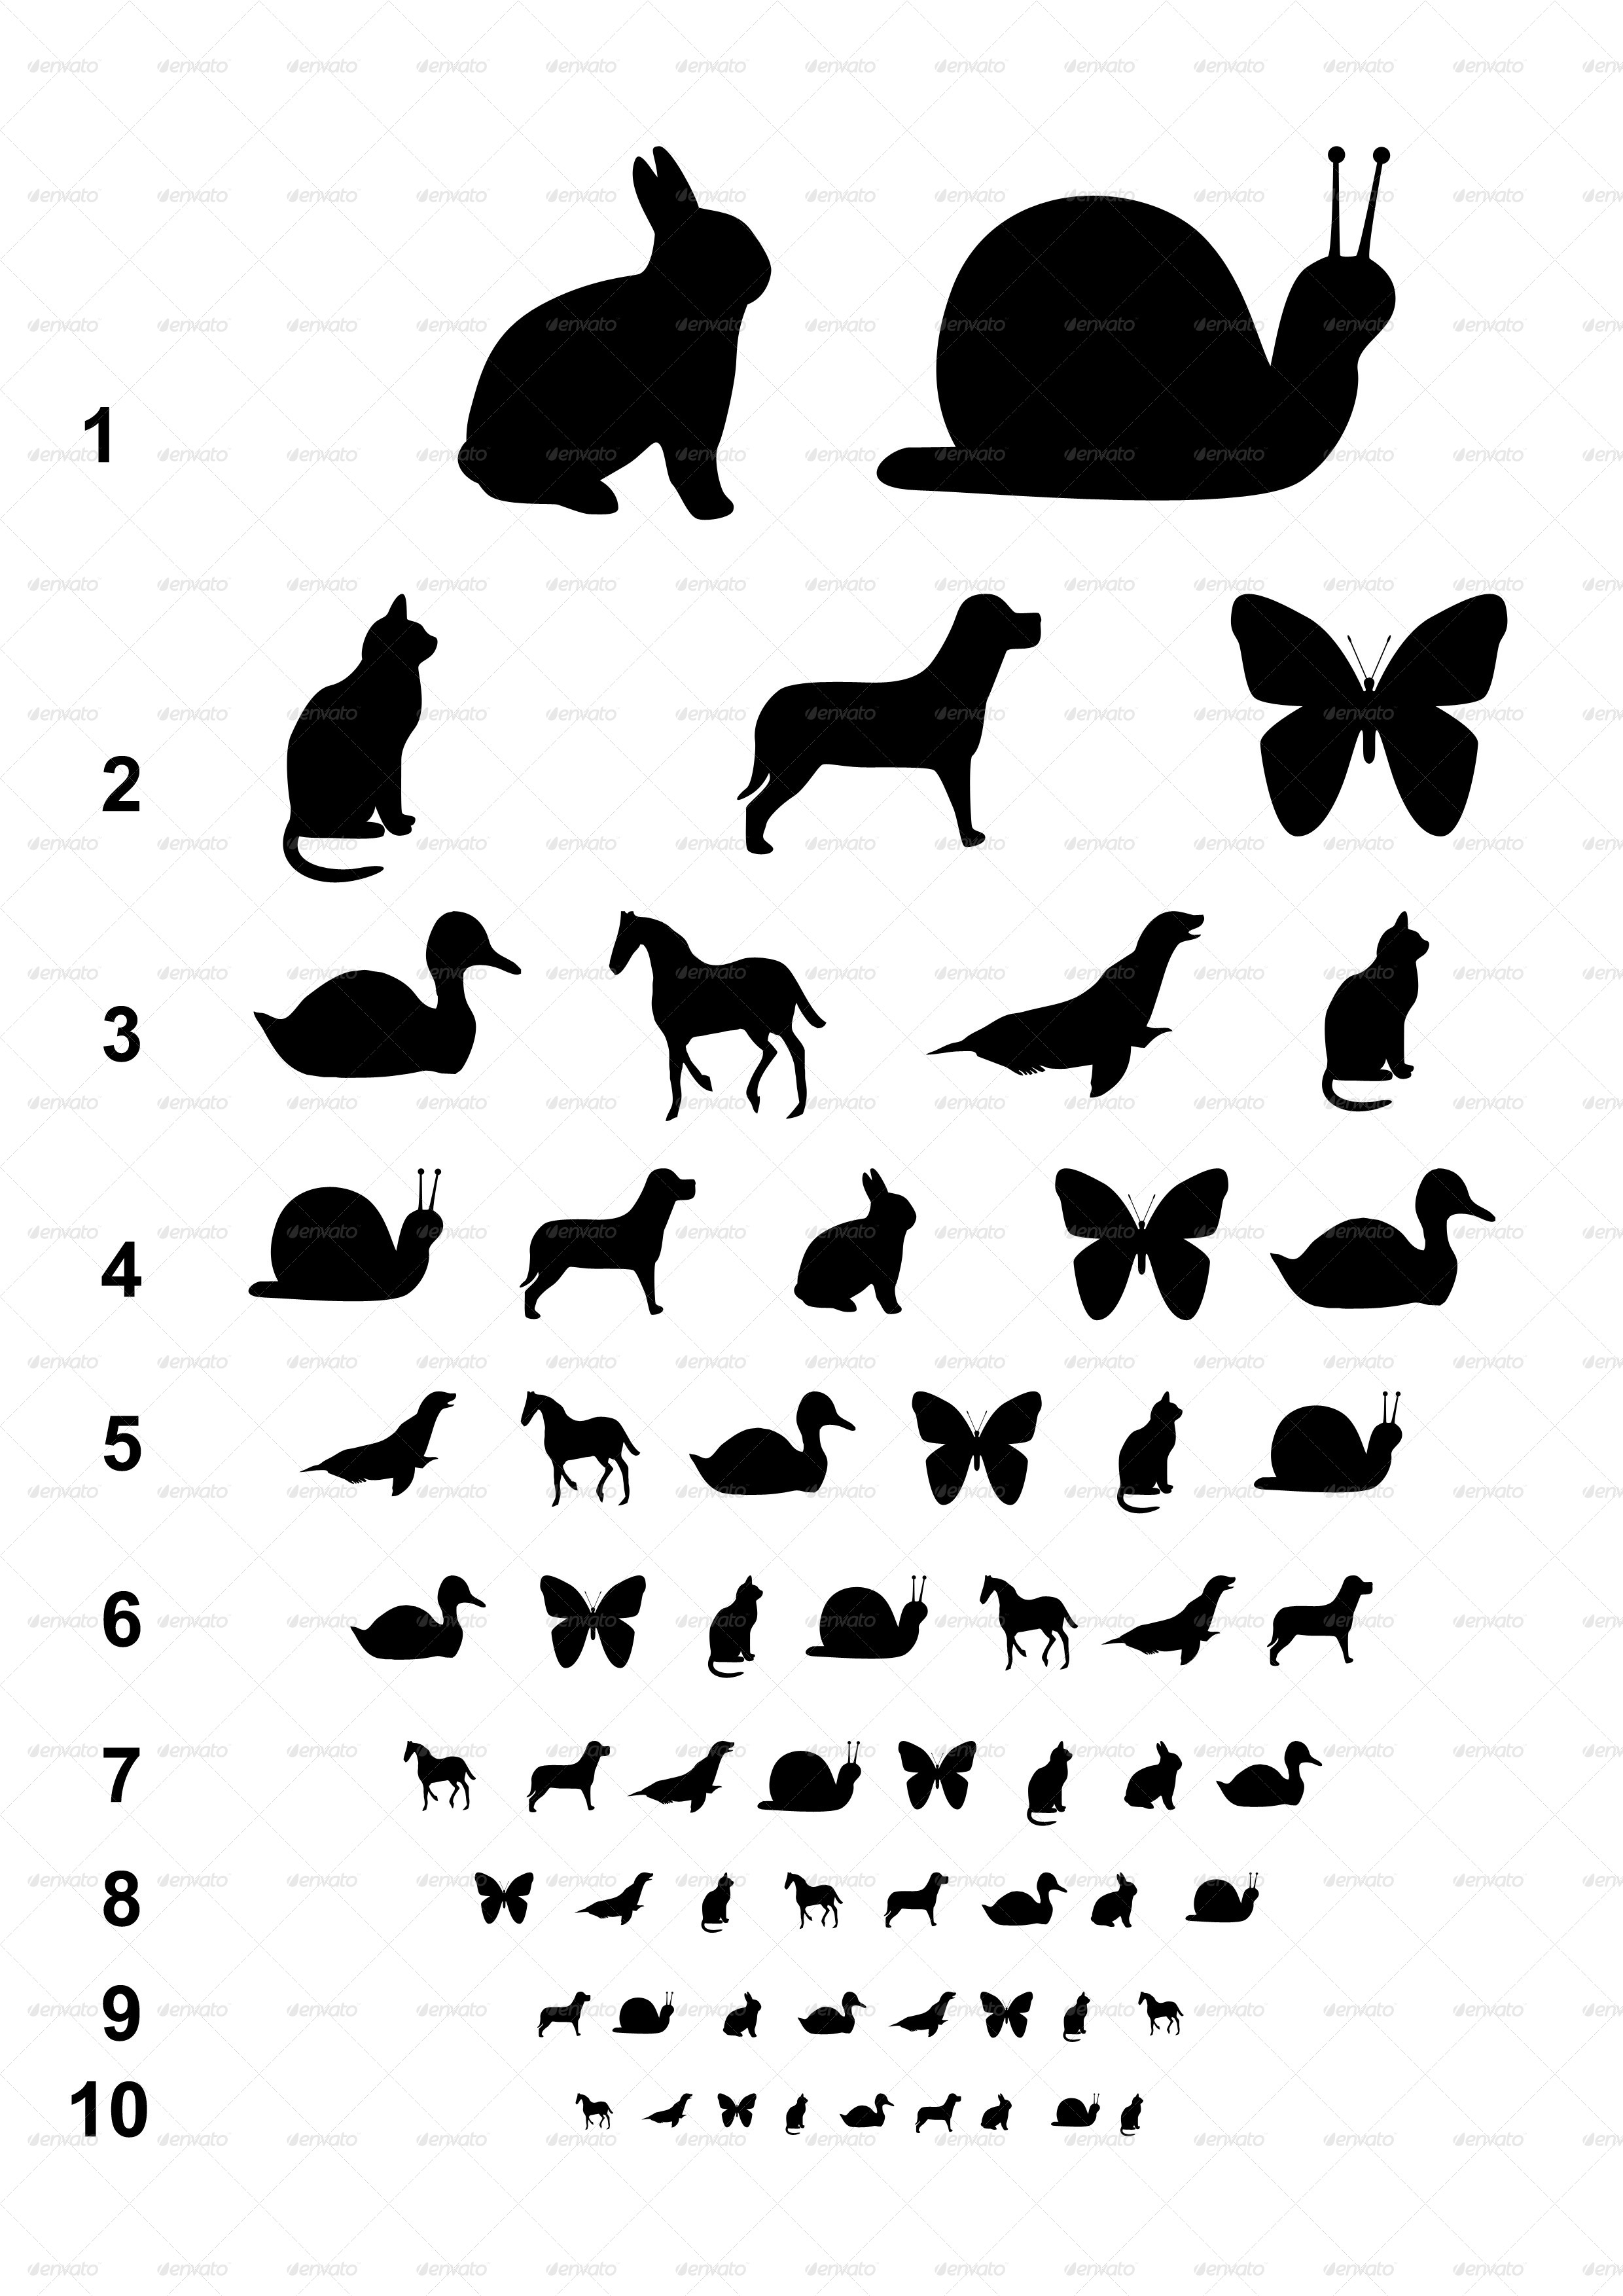 visual eye charts with animals for kids by